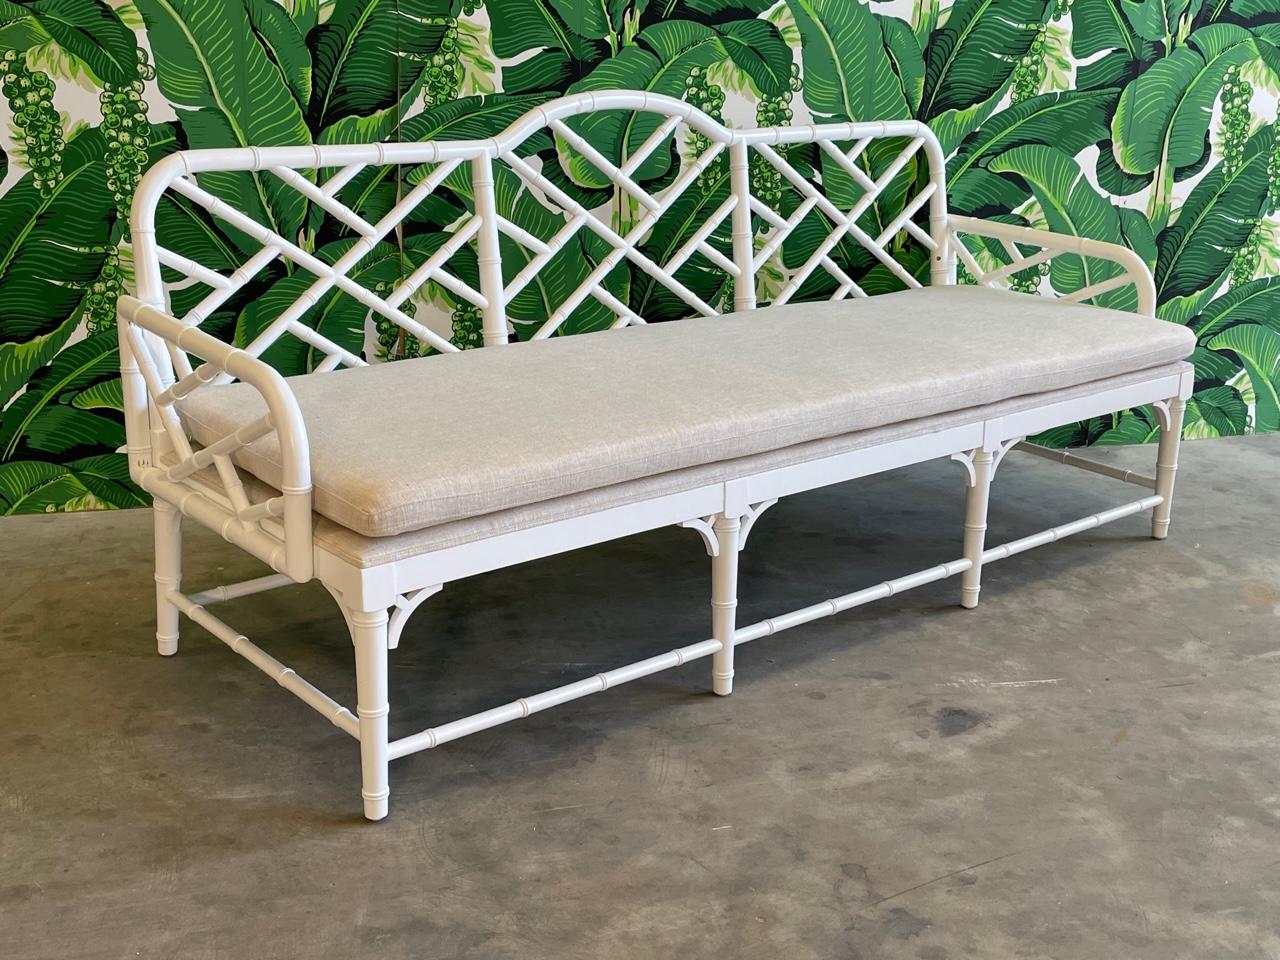 Faux bamboo garden sofa features chinoiserie style fretwork and solid tan cushions. Very good condition with only very minor imperfections consistent with age. We also have this sofa listed as a pair, check our other listings.

 